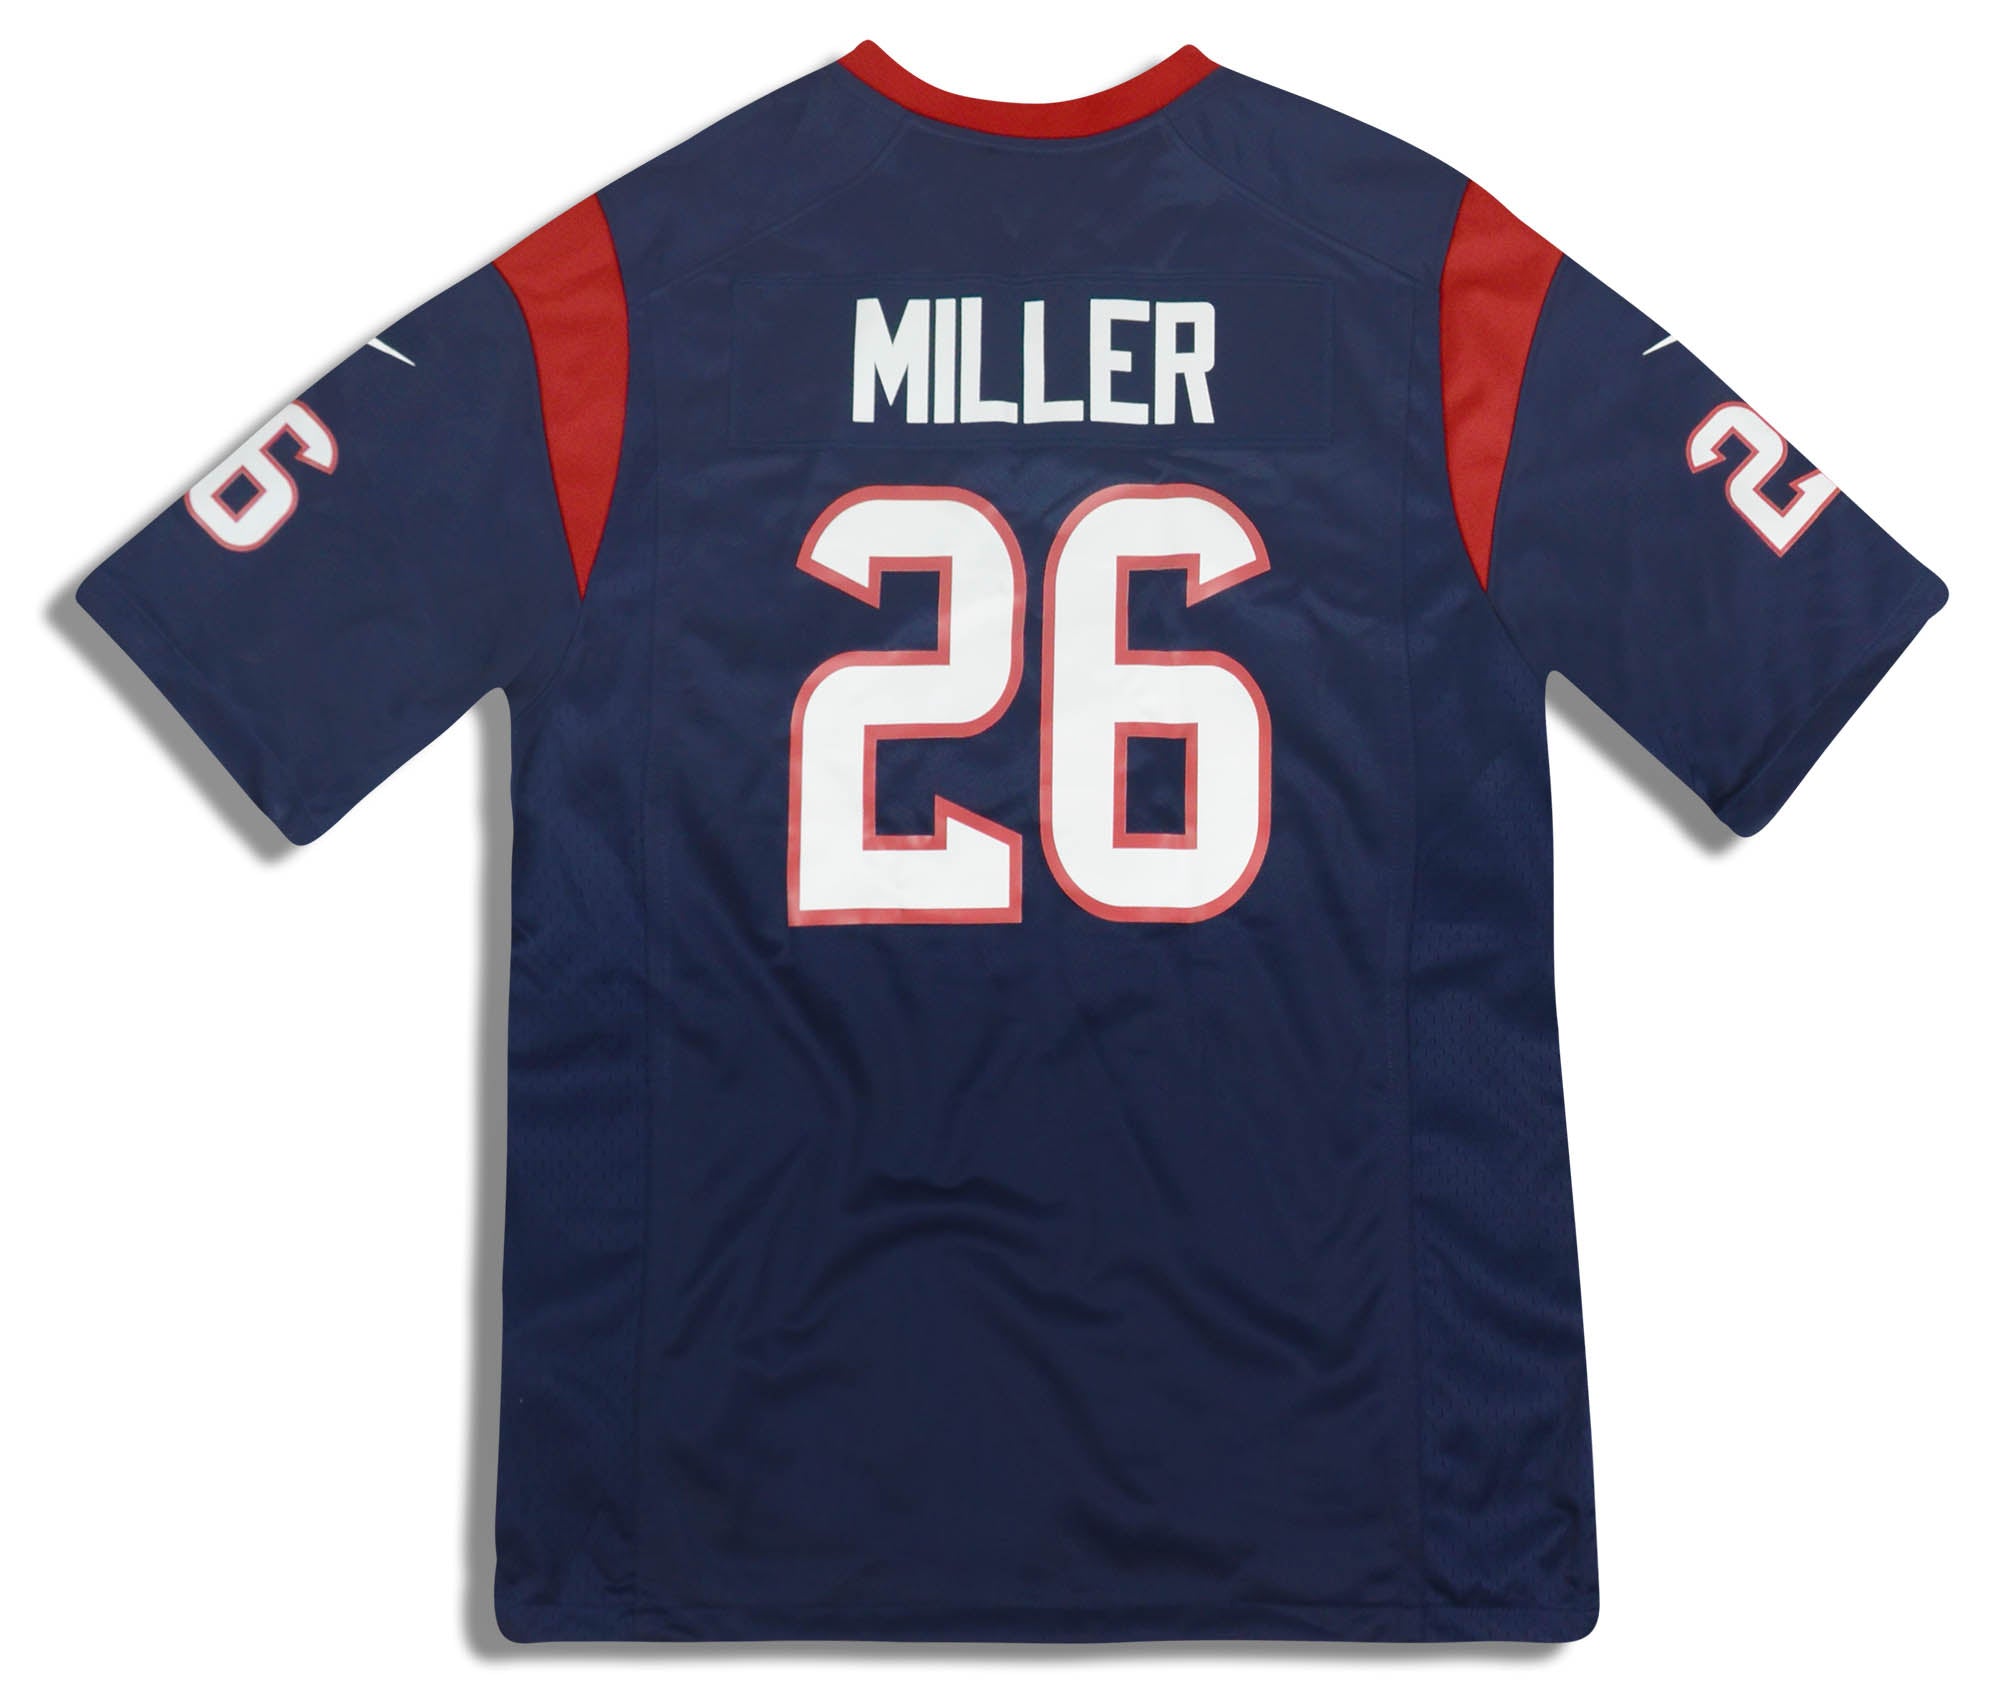 2018 HOUSTON TEXANS MILLER #26 NIKE GAME JERSEY (HOME) M - *AS NEW*